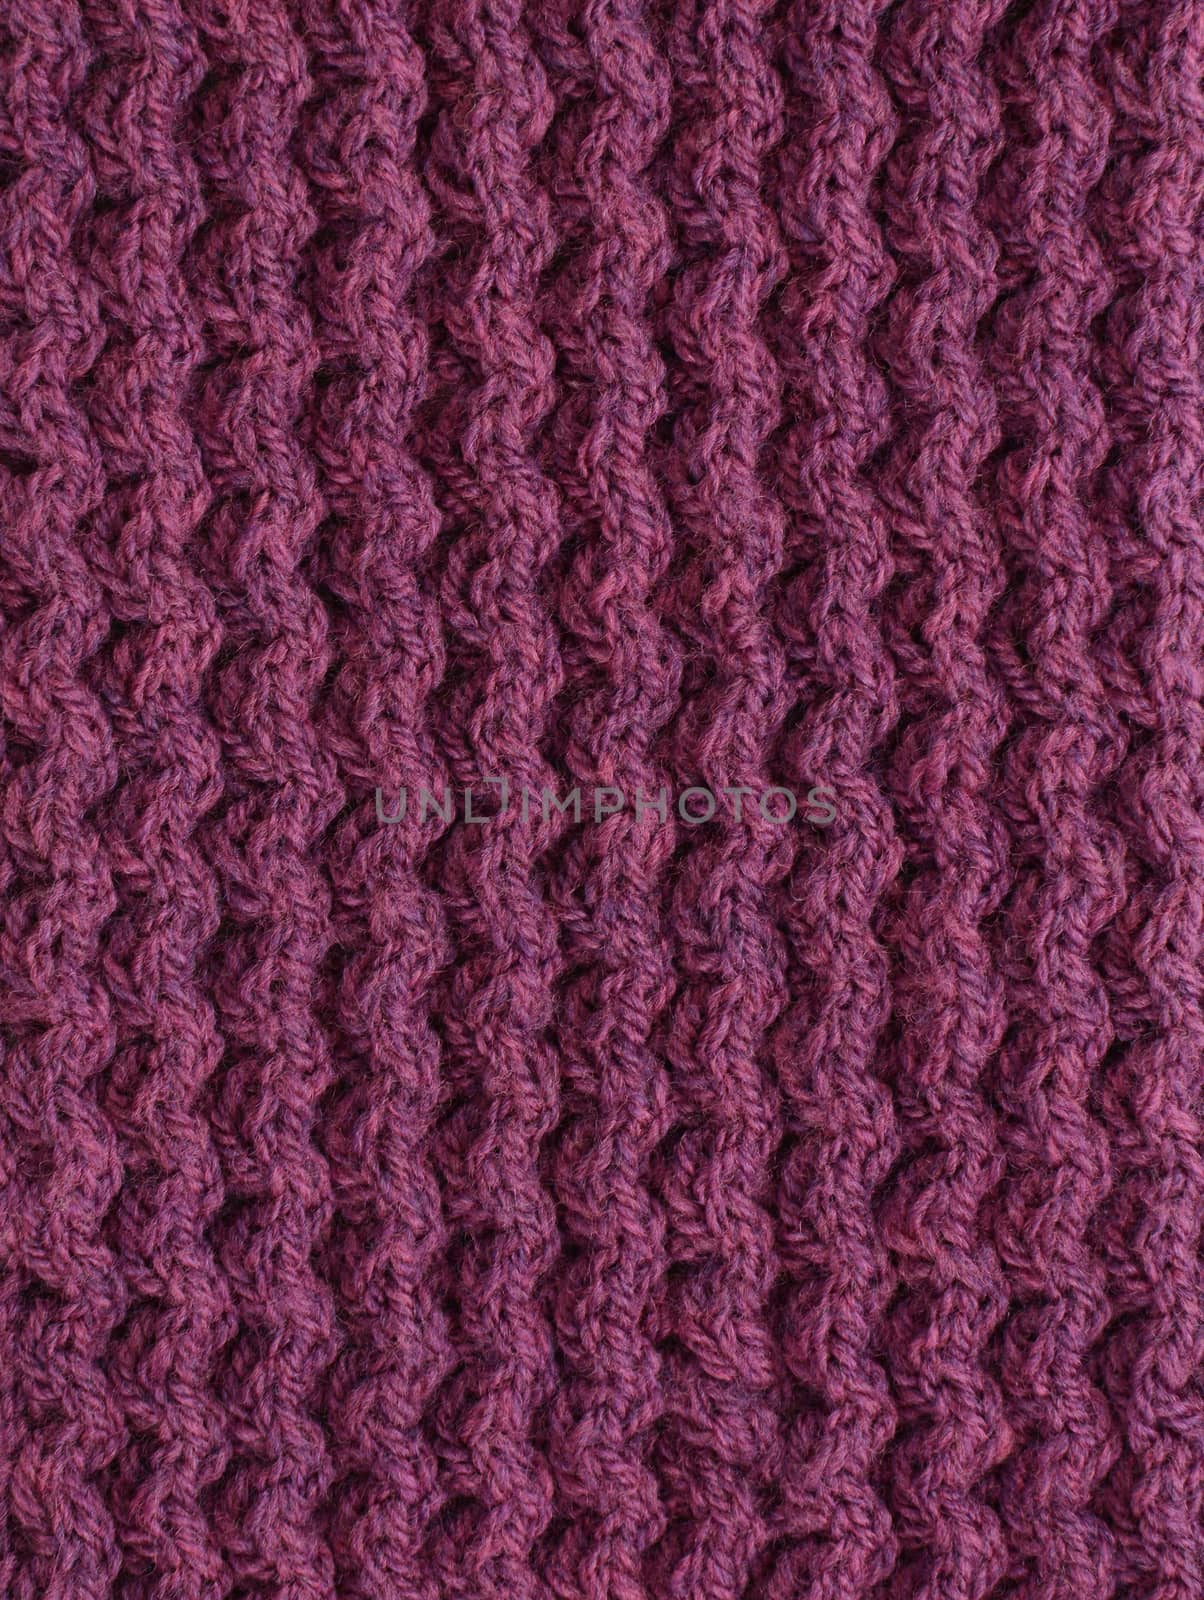 Purple cable knitting stitch as an abstract background texture